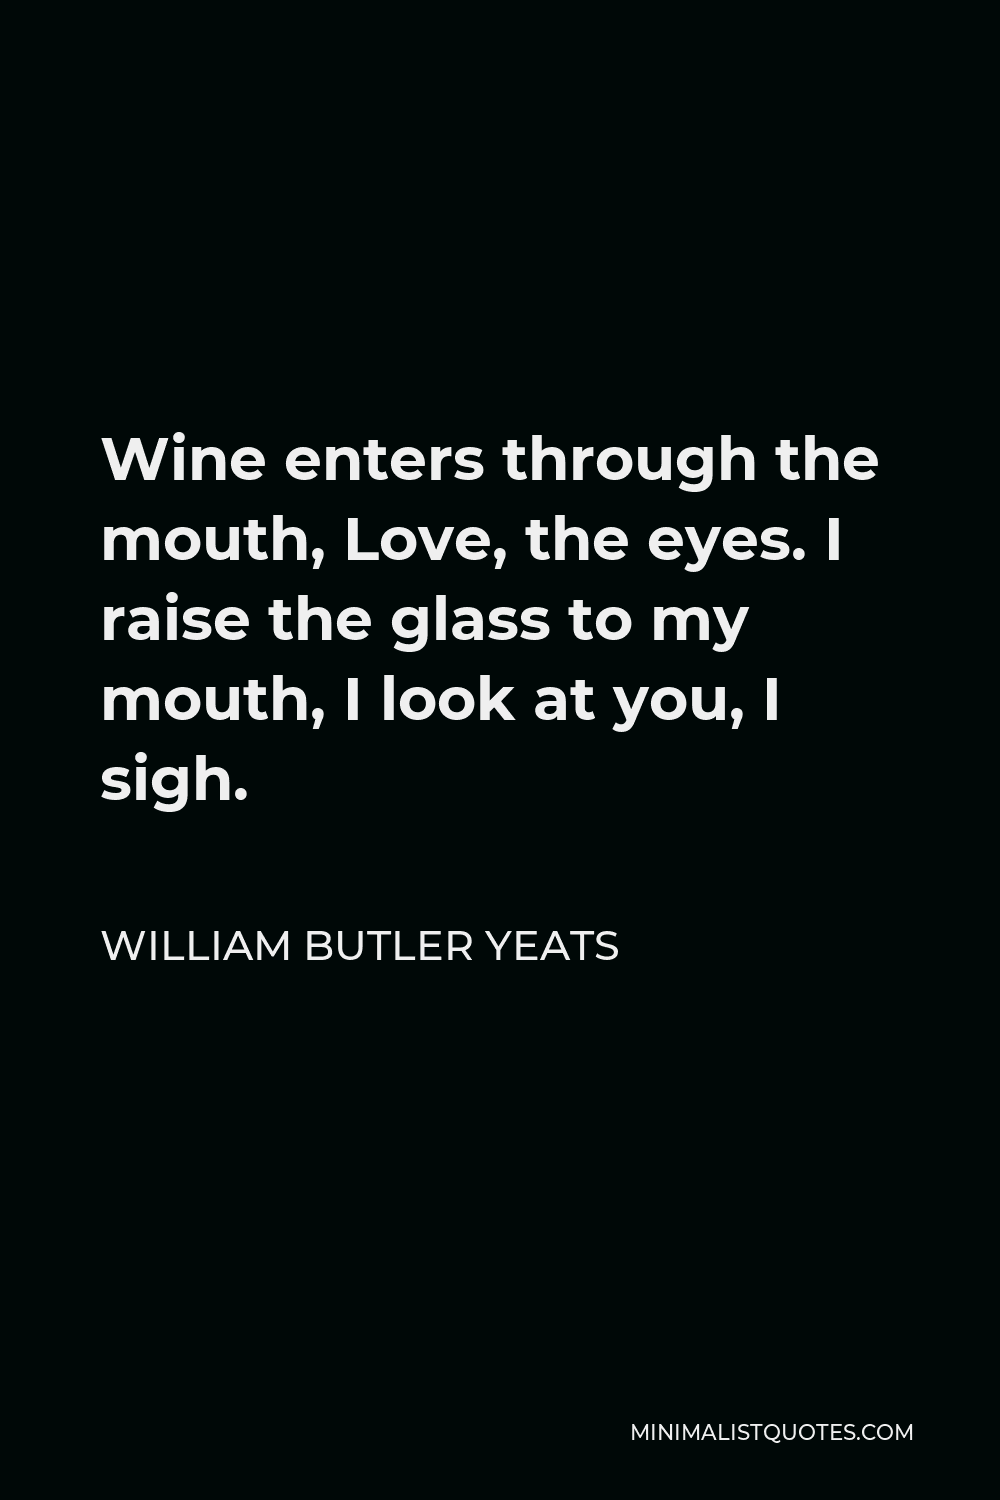 William Butler Yeats Quote - Wine enters through the mouth, Love, the eyes. I raise the glass to my mouth, I look at you, I sigh.